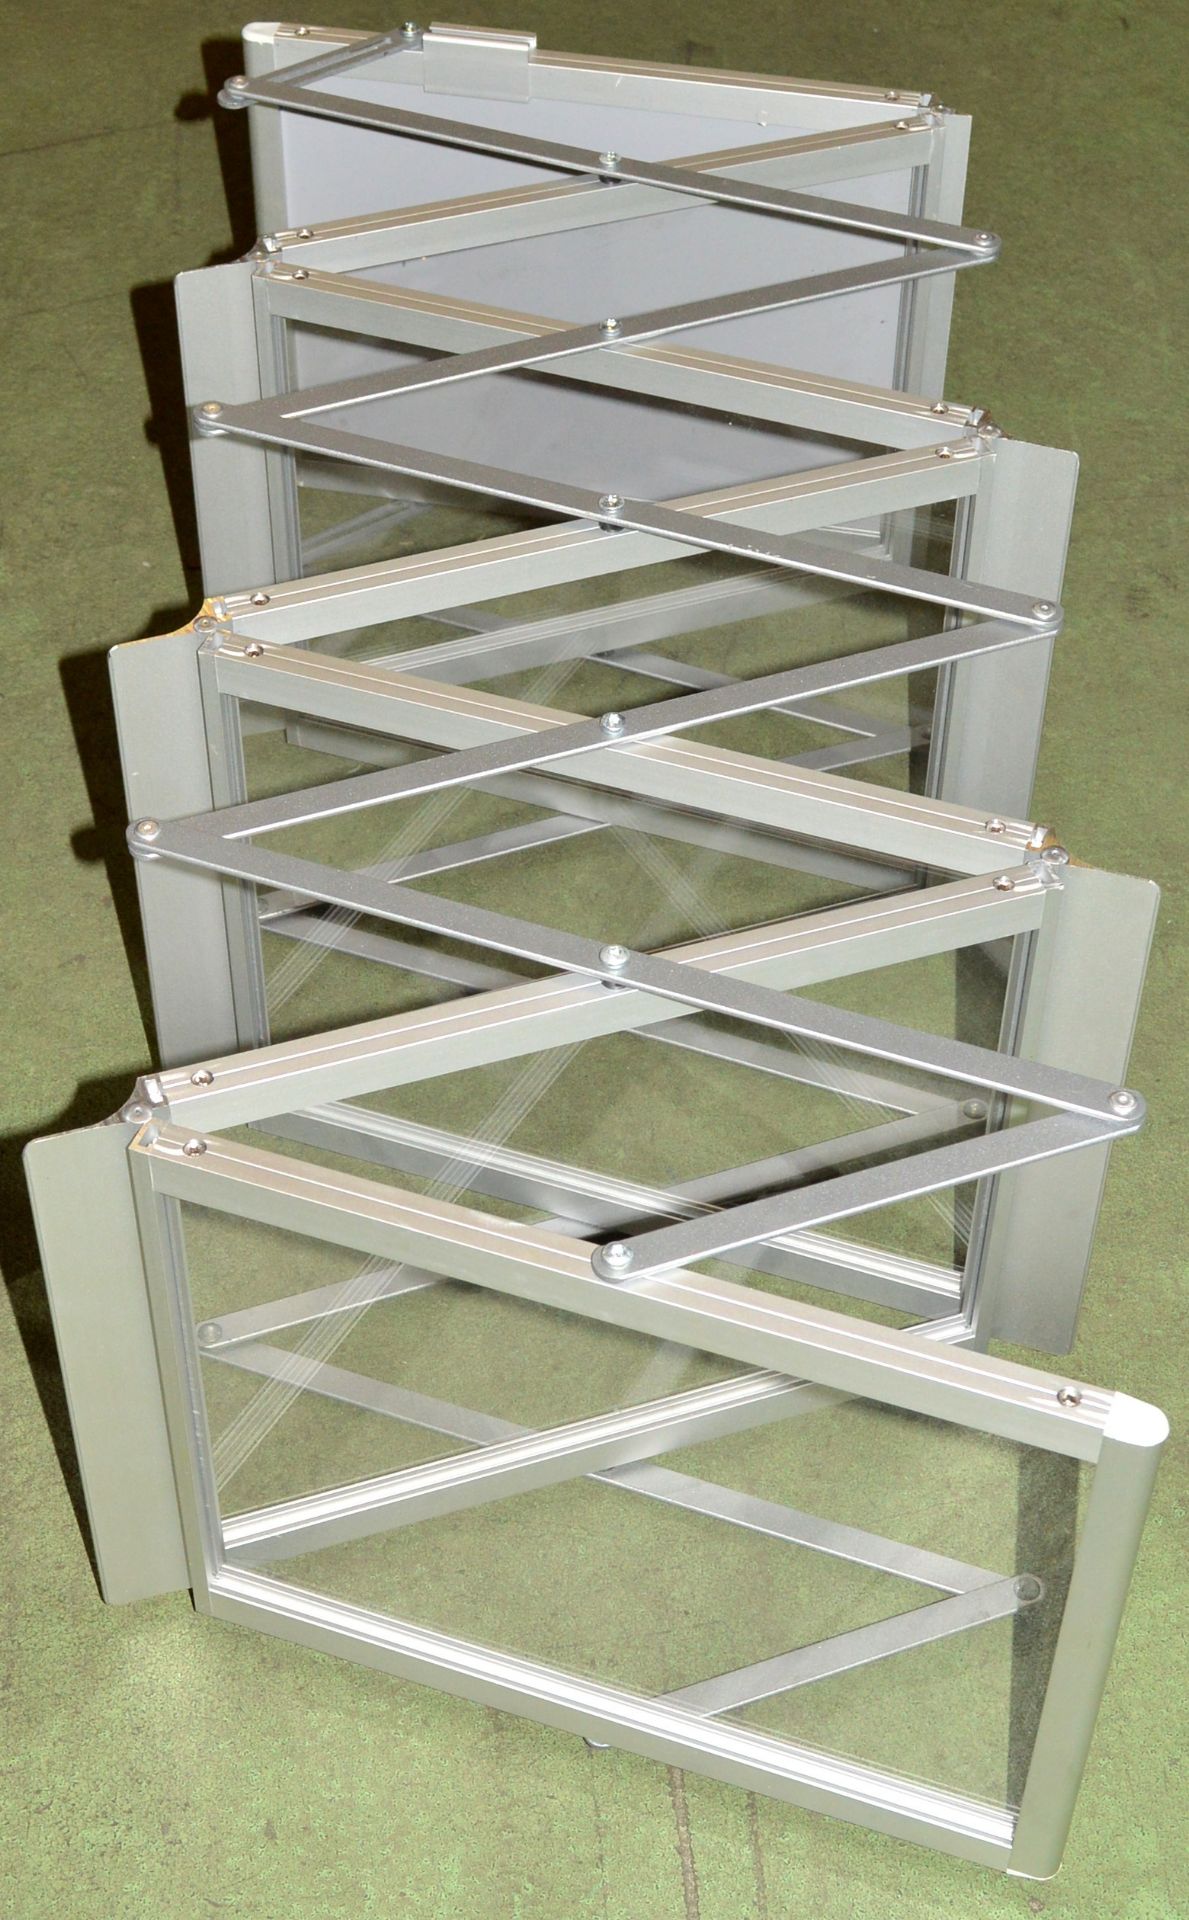 Leaflet Stand - Image 2 of 2